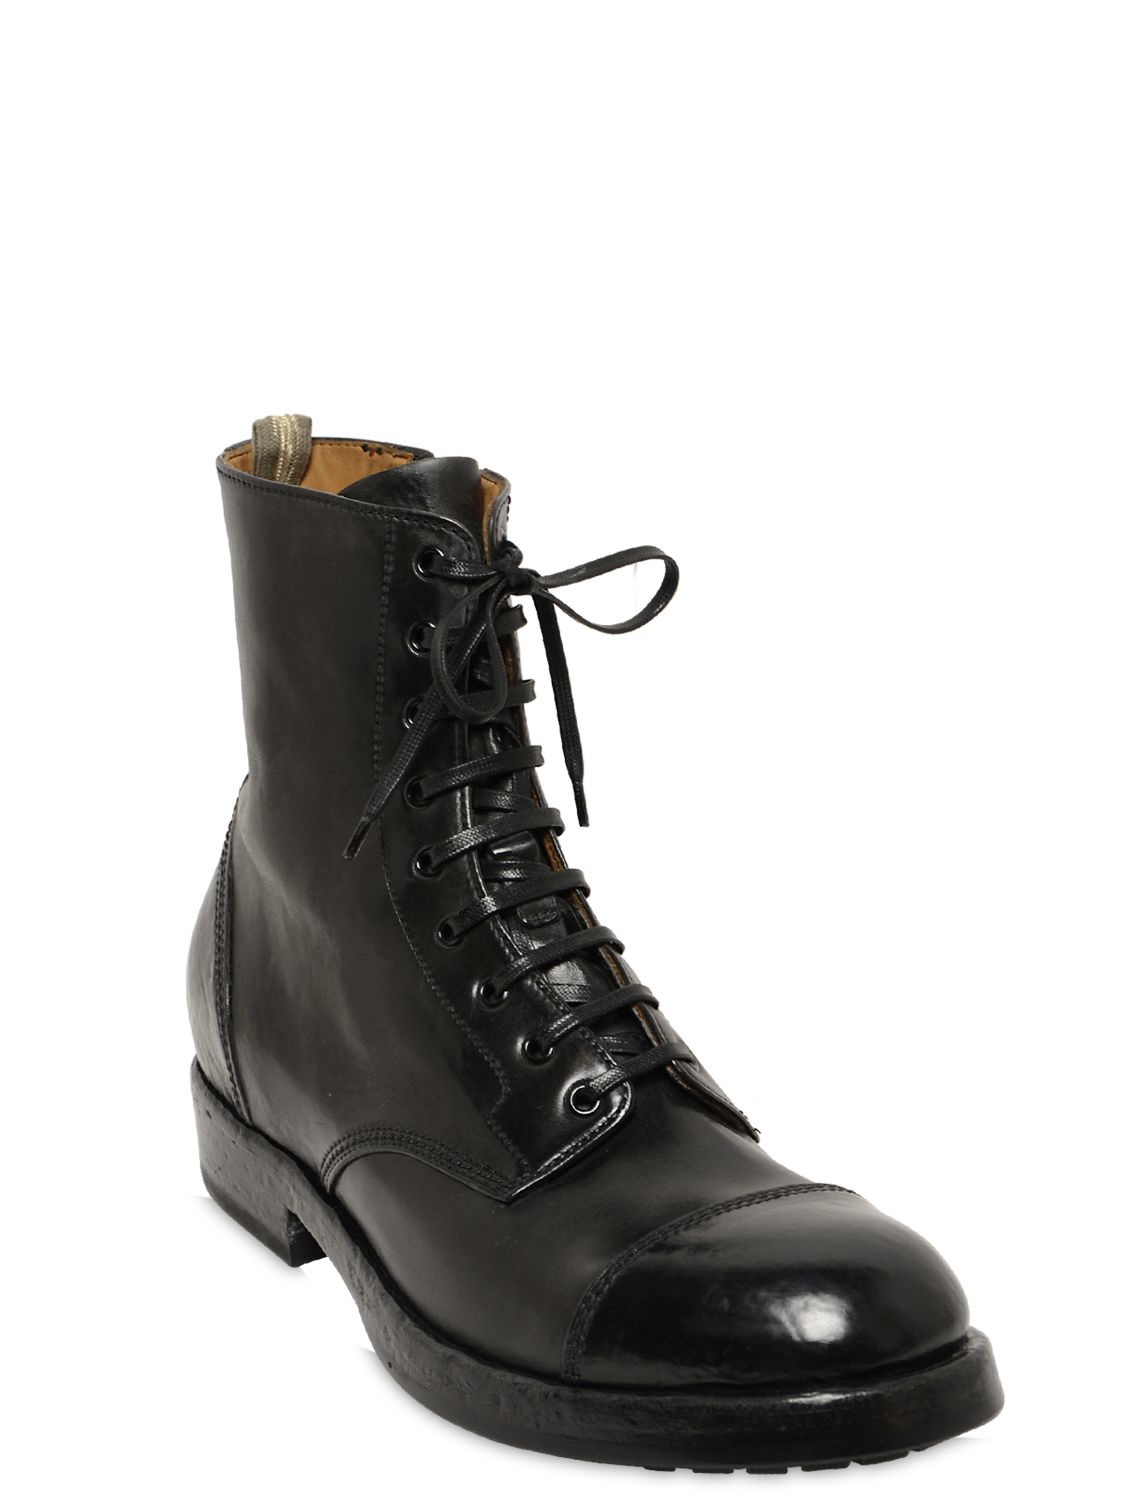 Lyst - Officine Creative Lace-up Leather Boots With Side Zip in Black ...